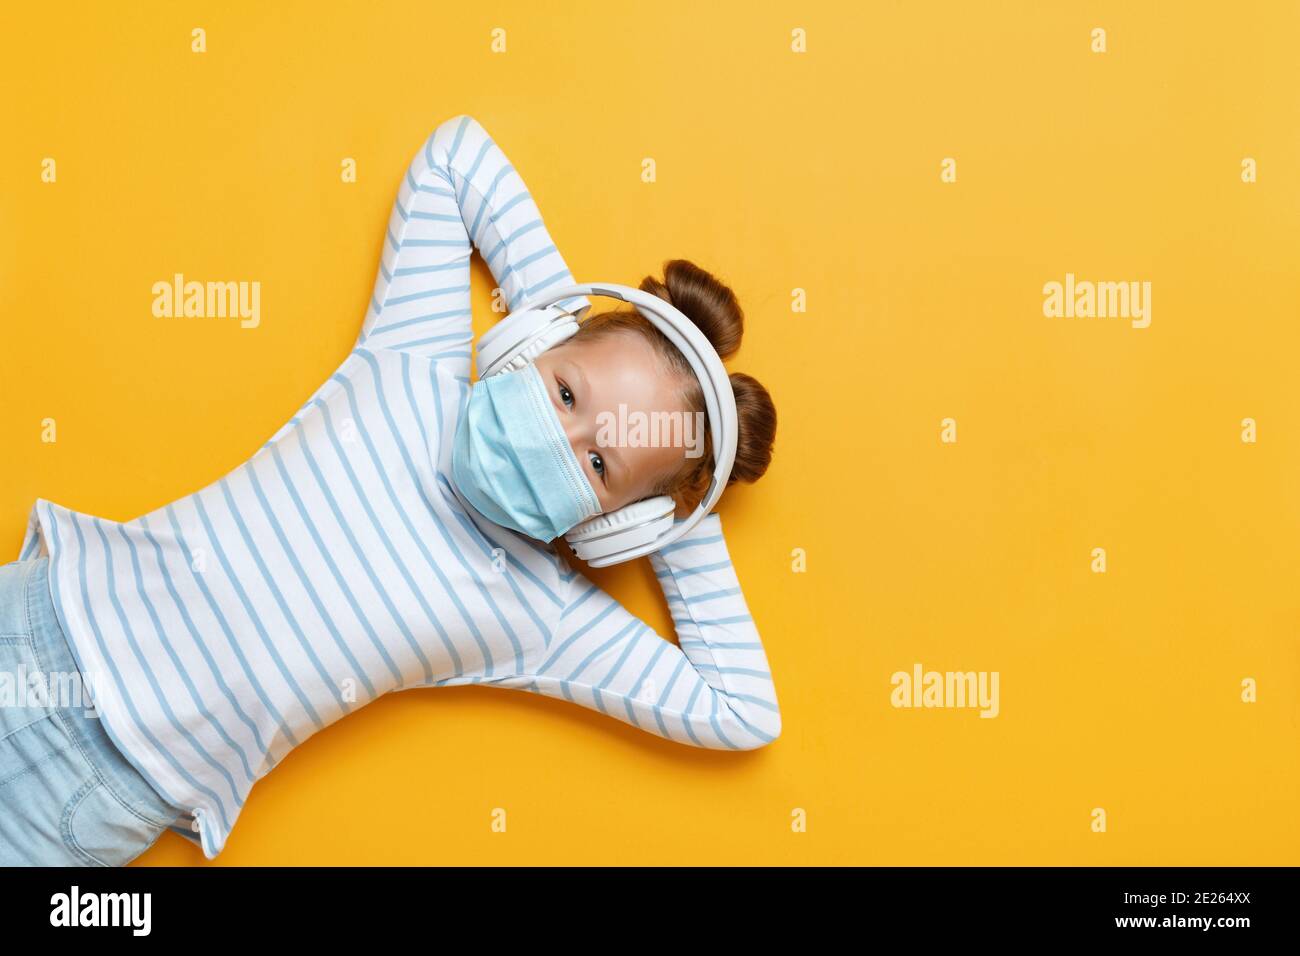 Cheerful cute little girl listening to modern technology headphones on yellow background. The child lies in a protective medical mask, hands behind hi Stock Photo